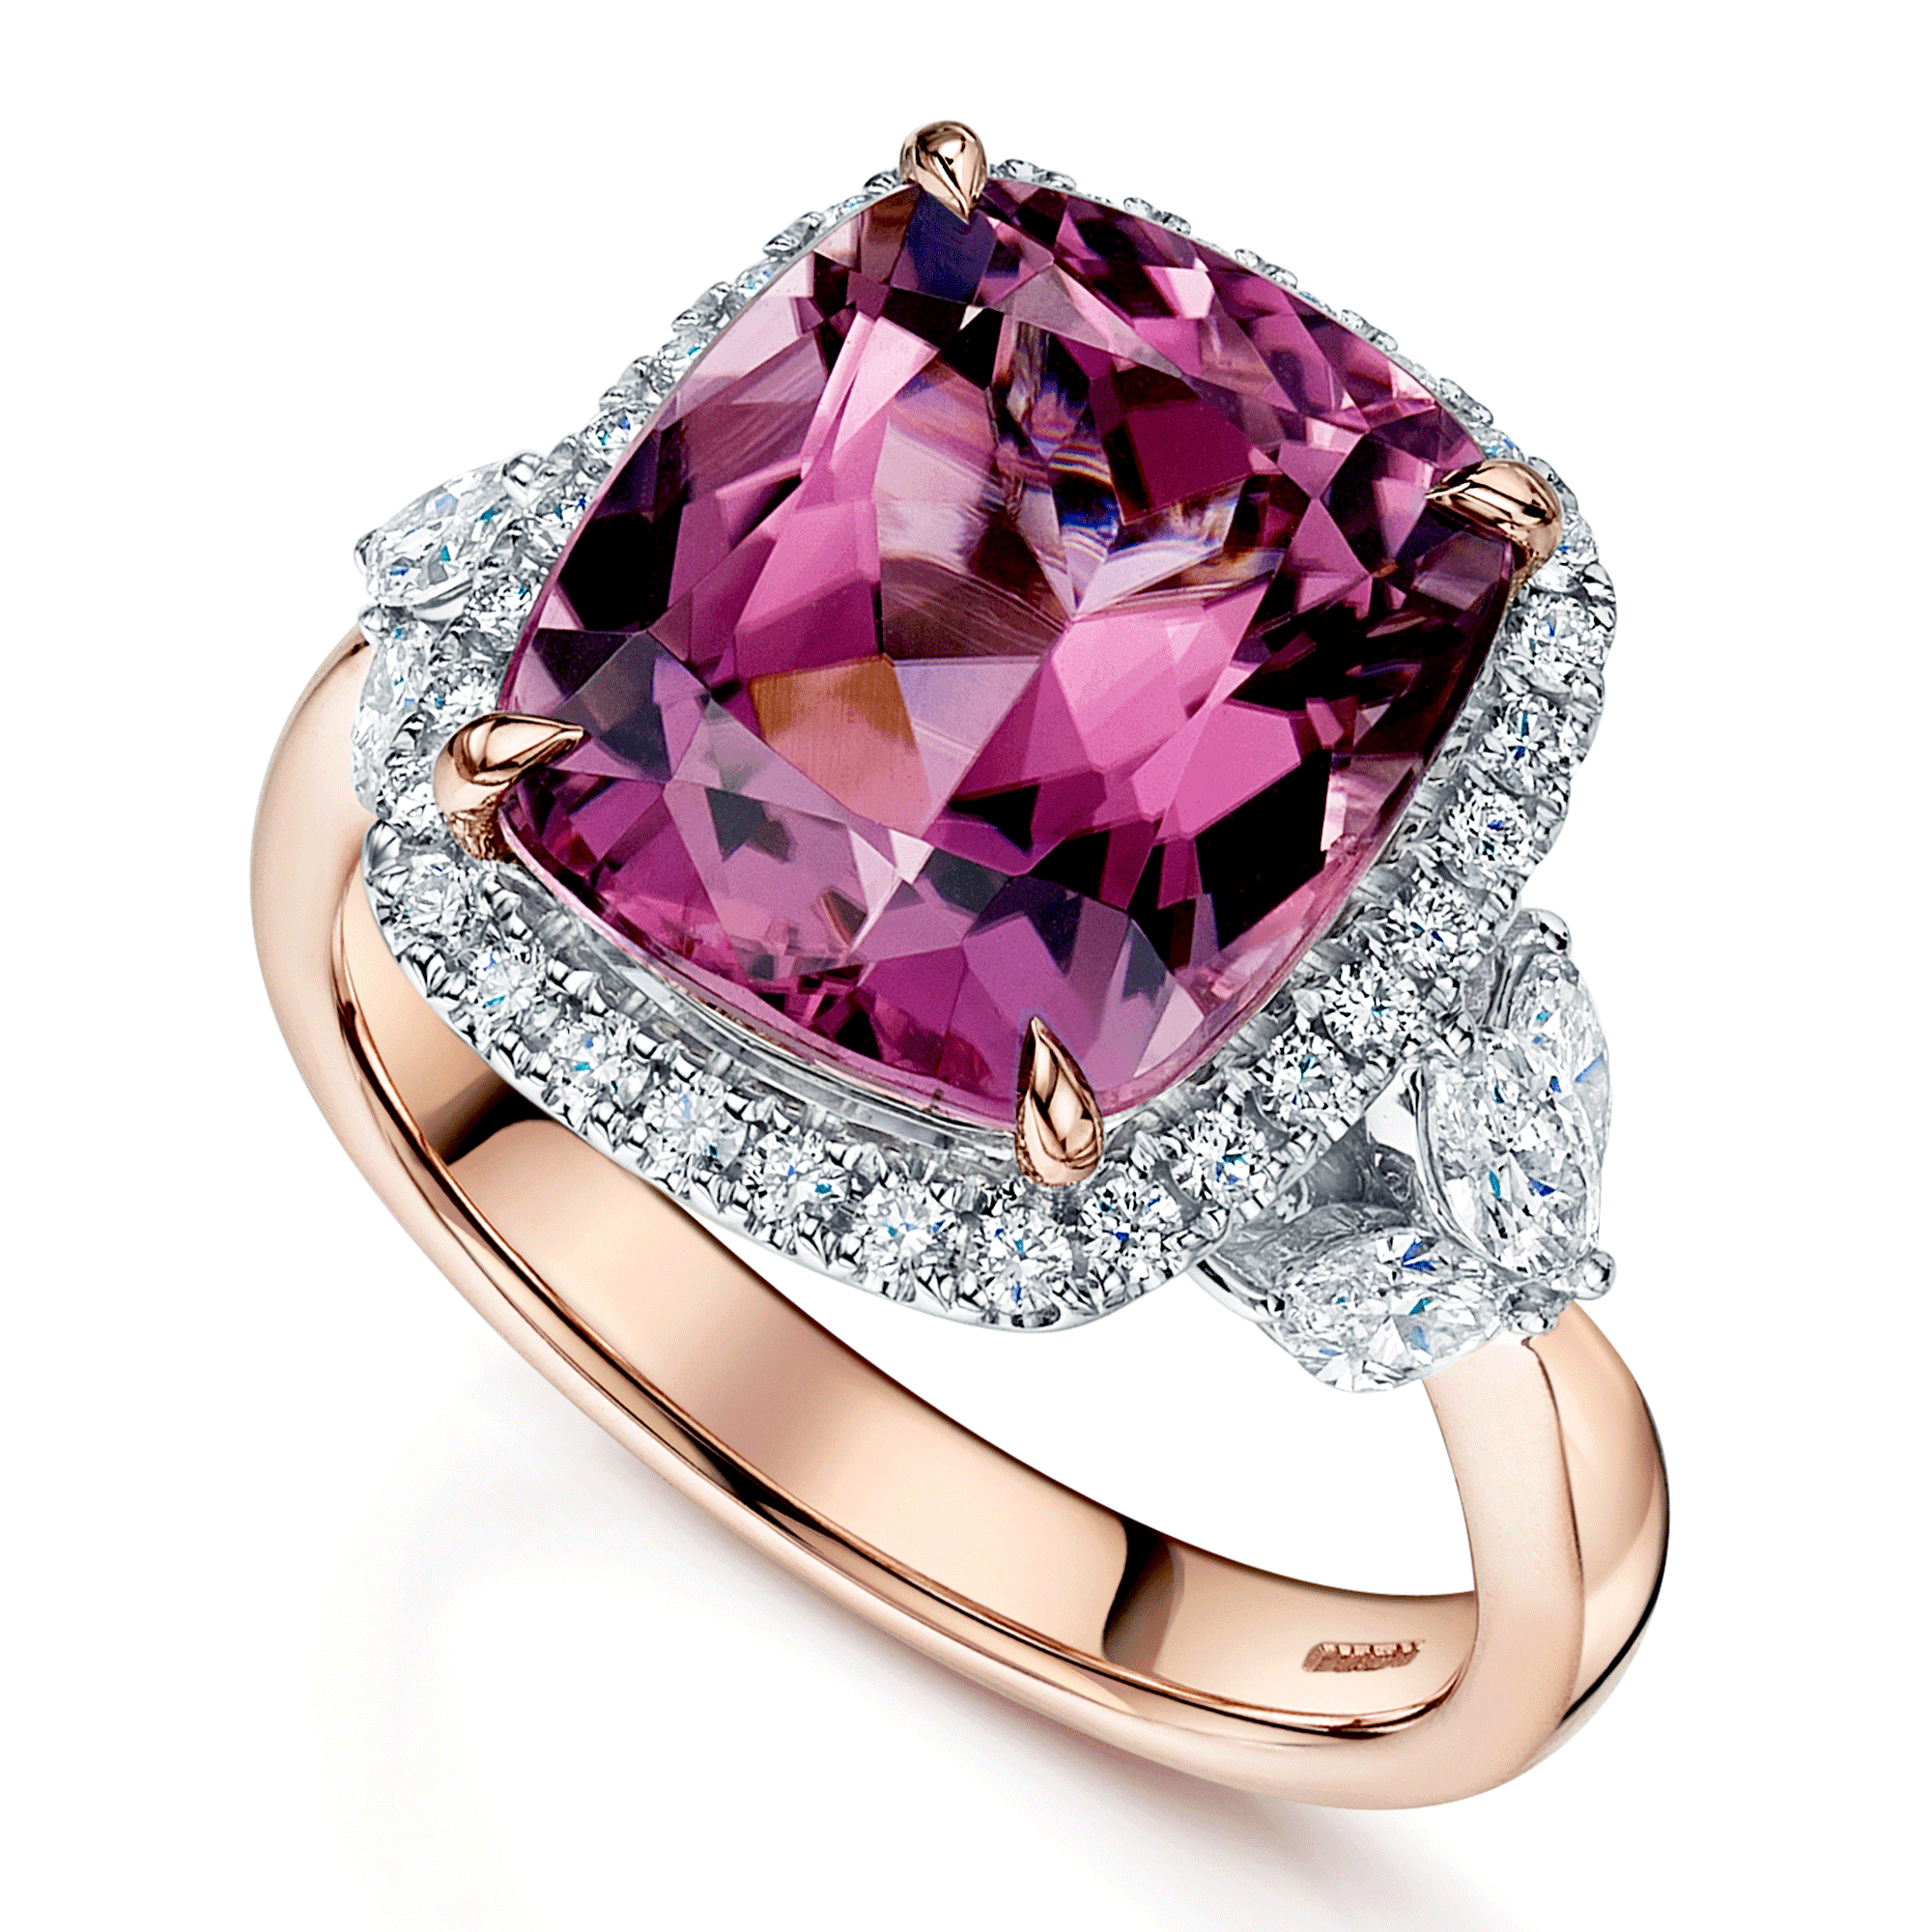 18ct Rose & White Gold Cushion Cut Pink Tourmaline Diamond Halo Ring With Marquise Cut Diamond Shoulders